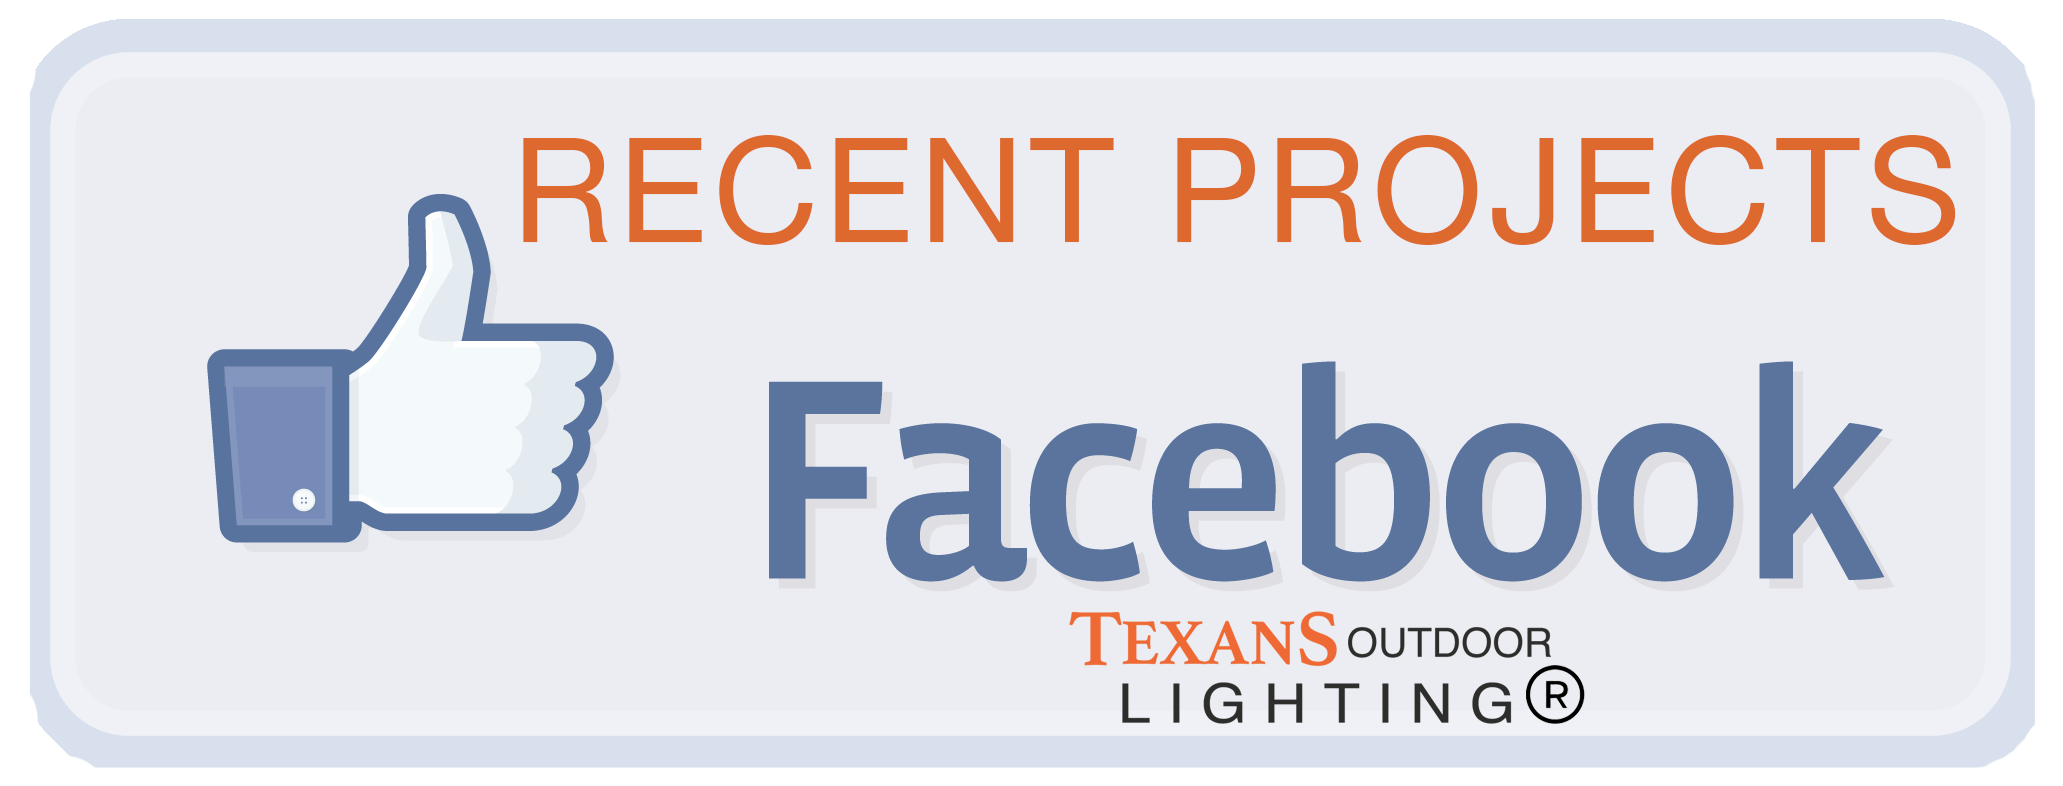 Texans Outdoor Lighting Facebook Business PagePage